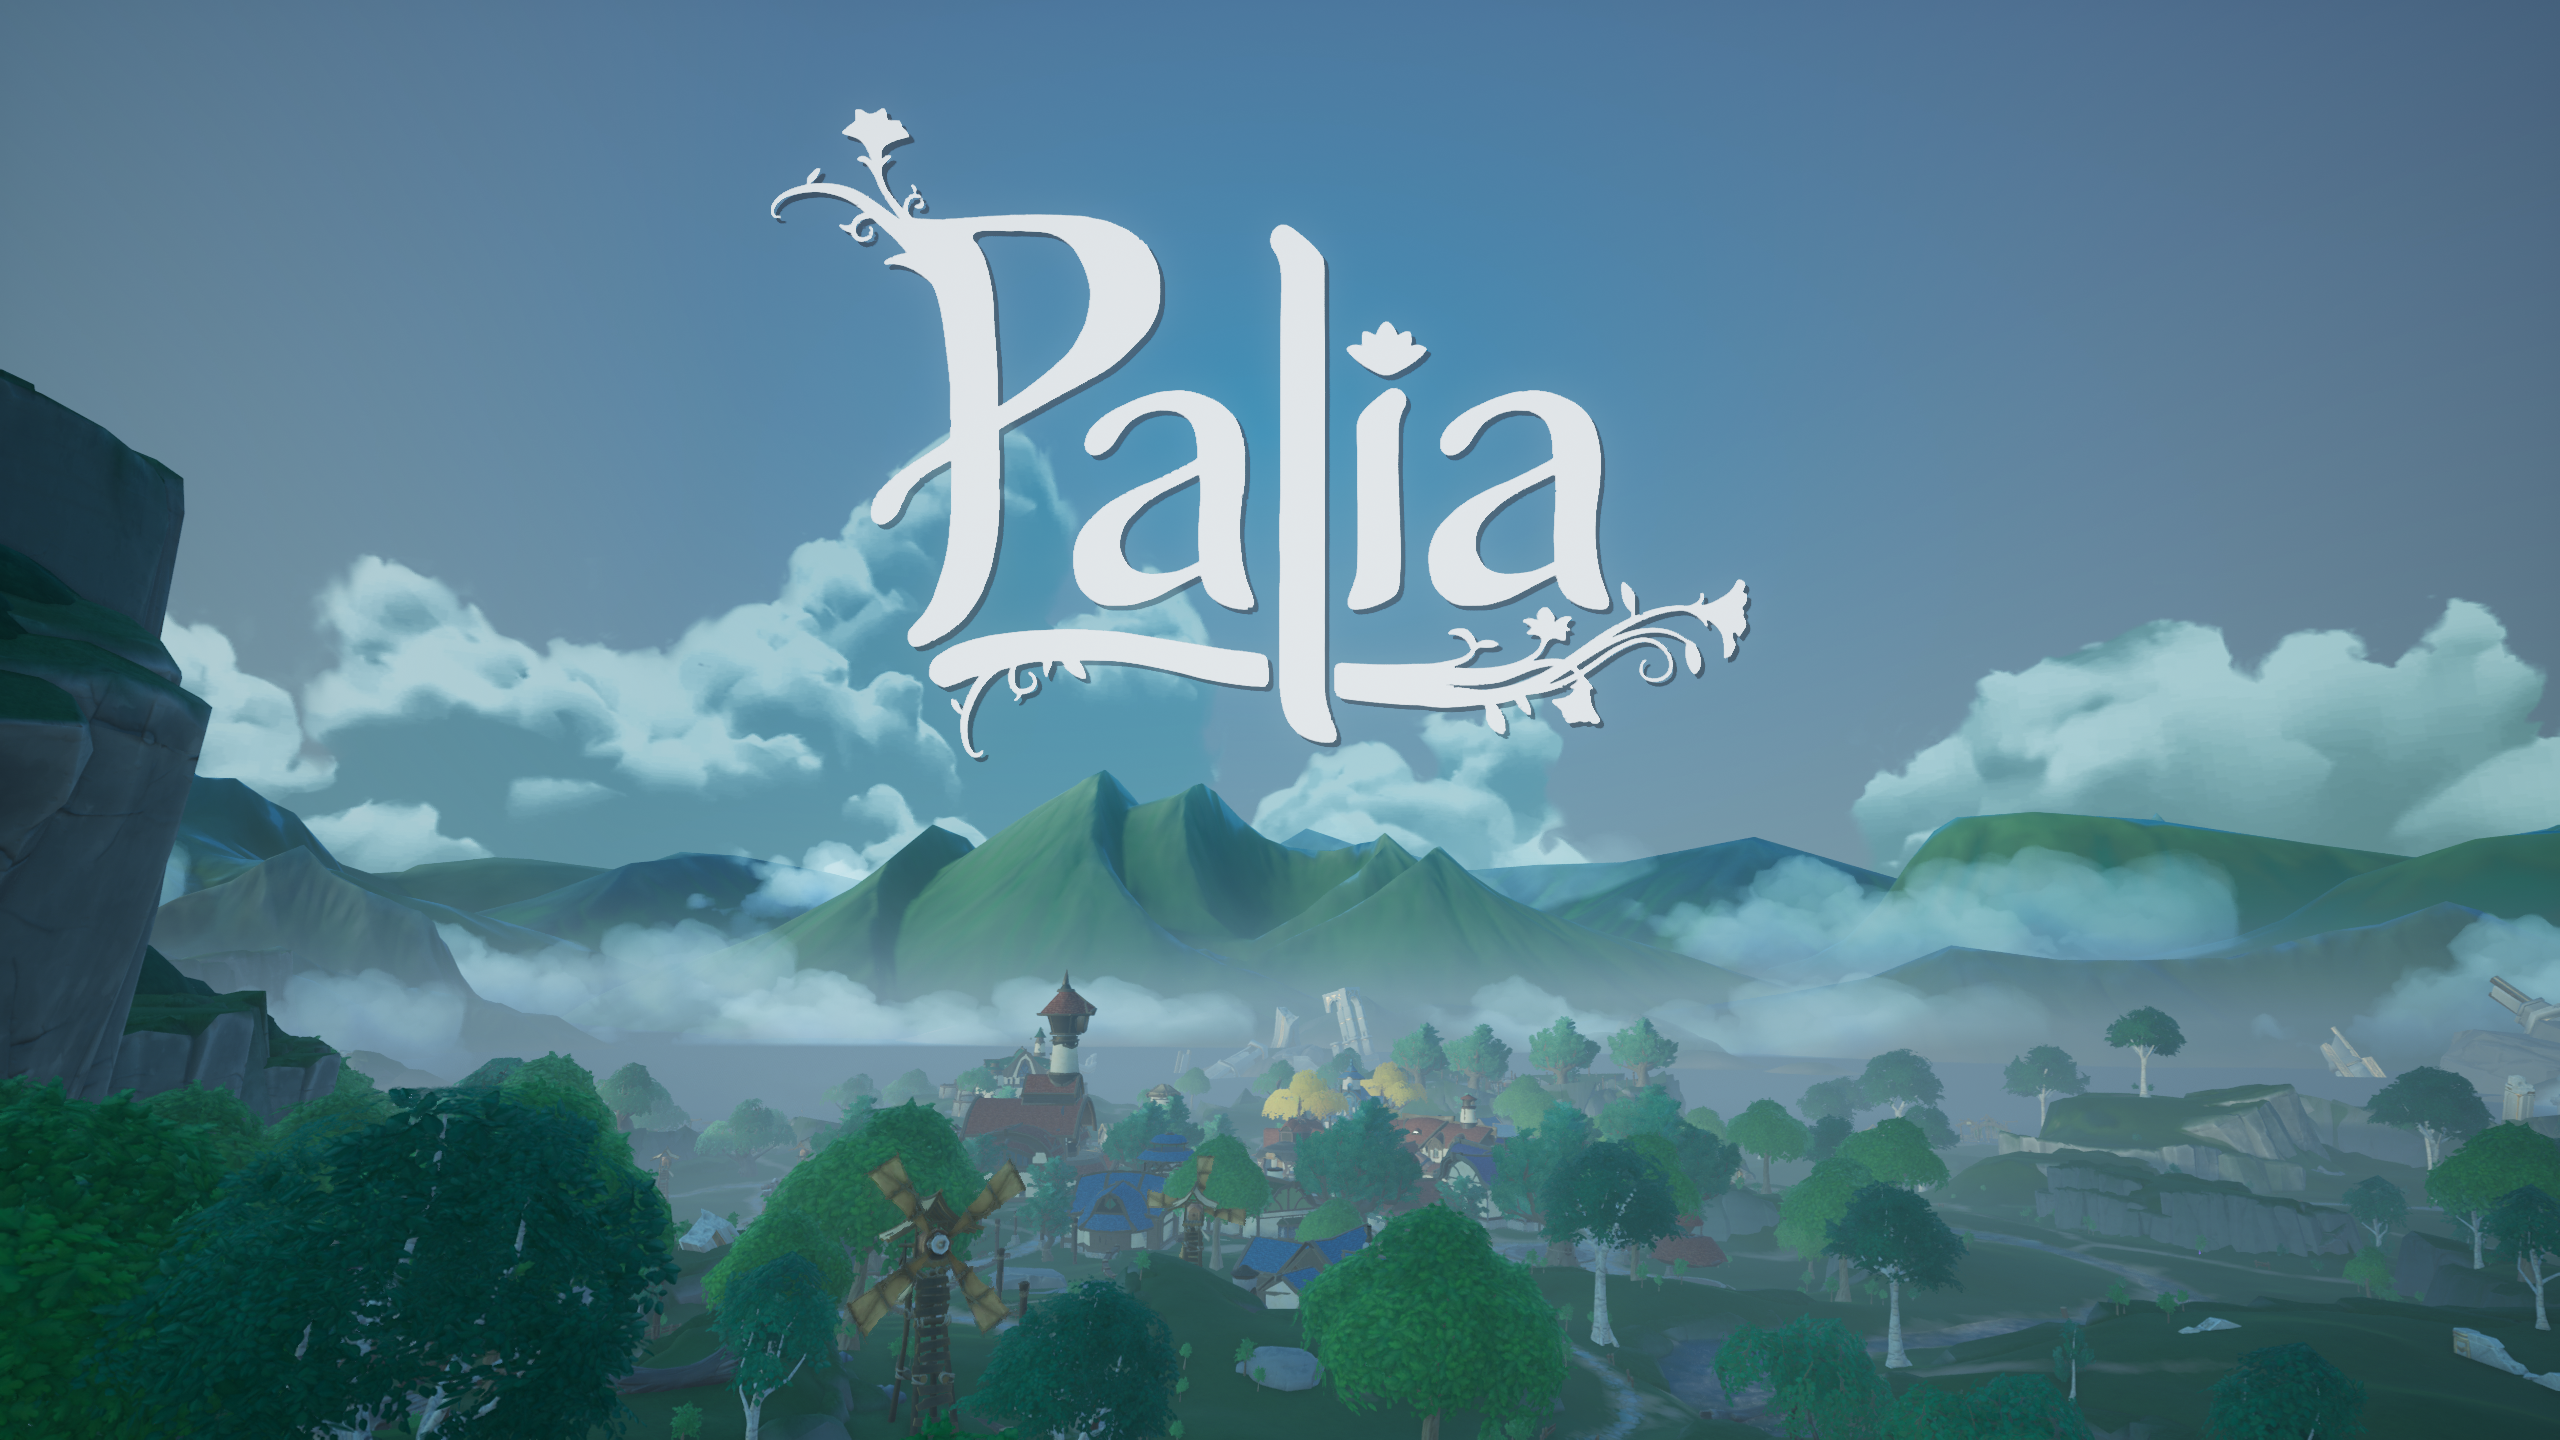 Palia is Coming to Nintendo Switch